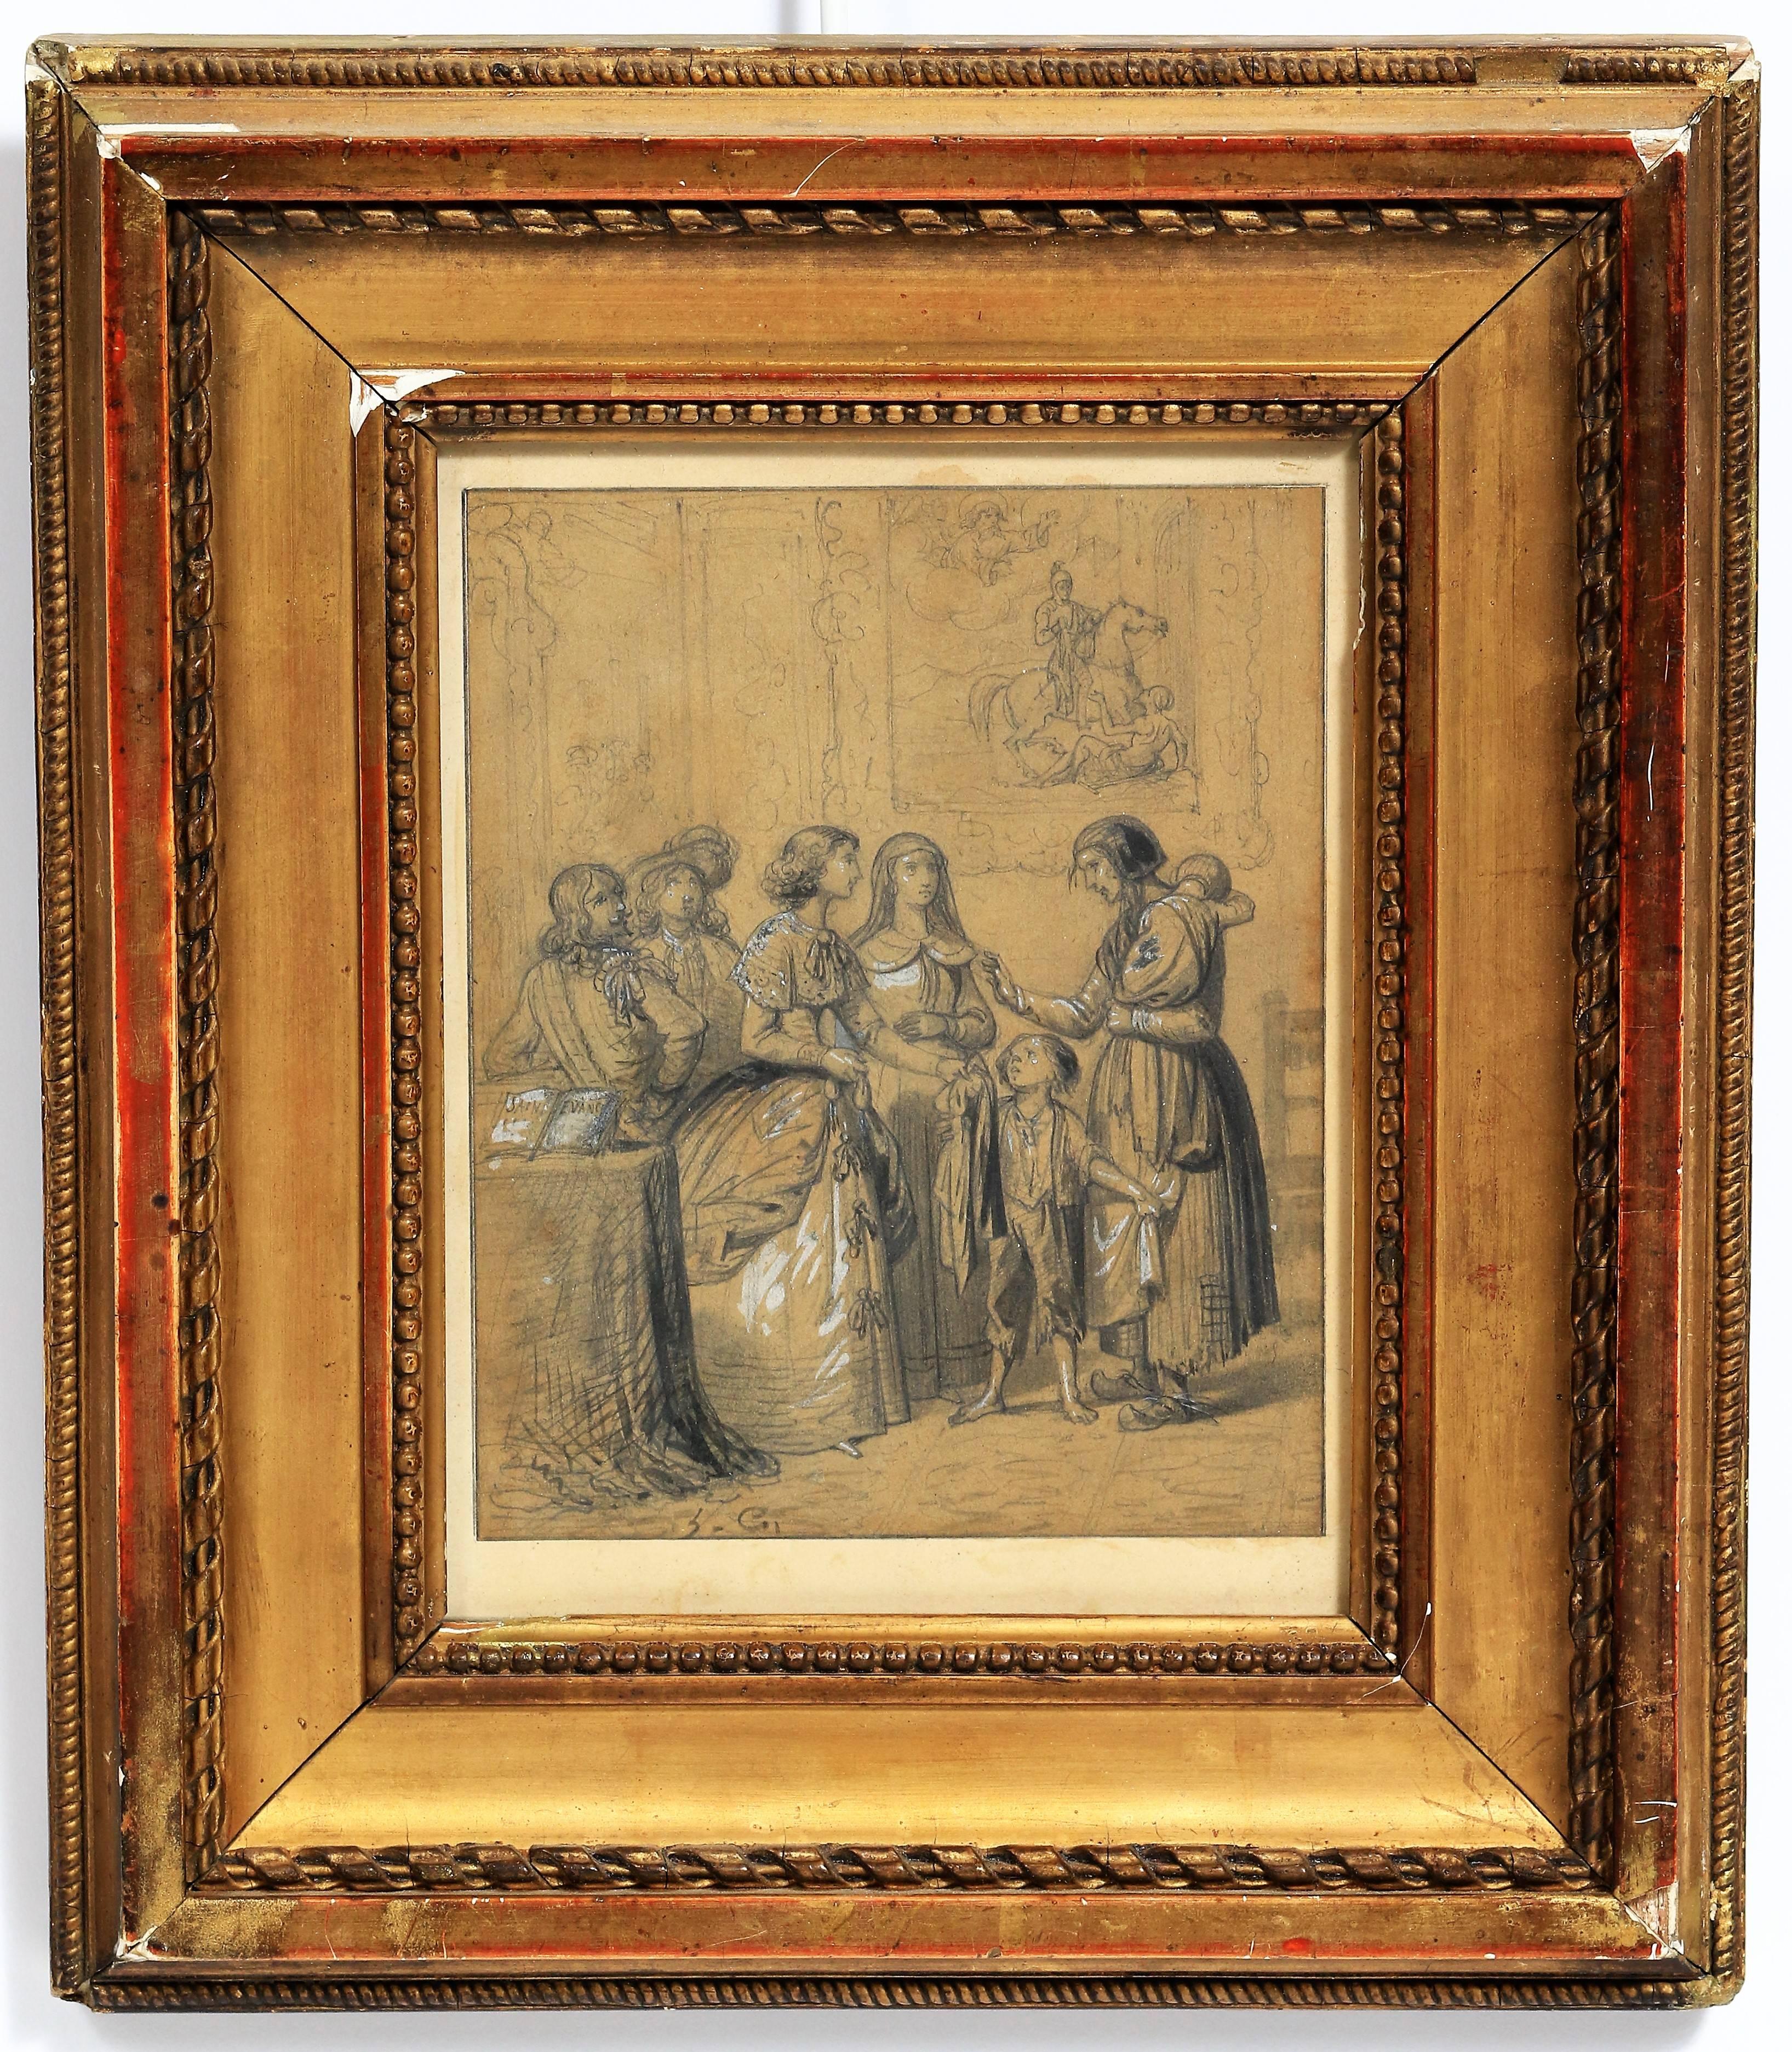 Adorable drawing from the middle of the 19th century representing an alms giving scene in a church. In the background of the drawing, there is a painting representing Saint Martin cutting off his coat to offer it to a beggar. This painting echoes